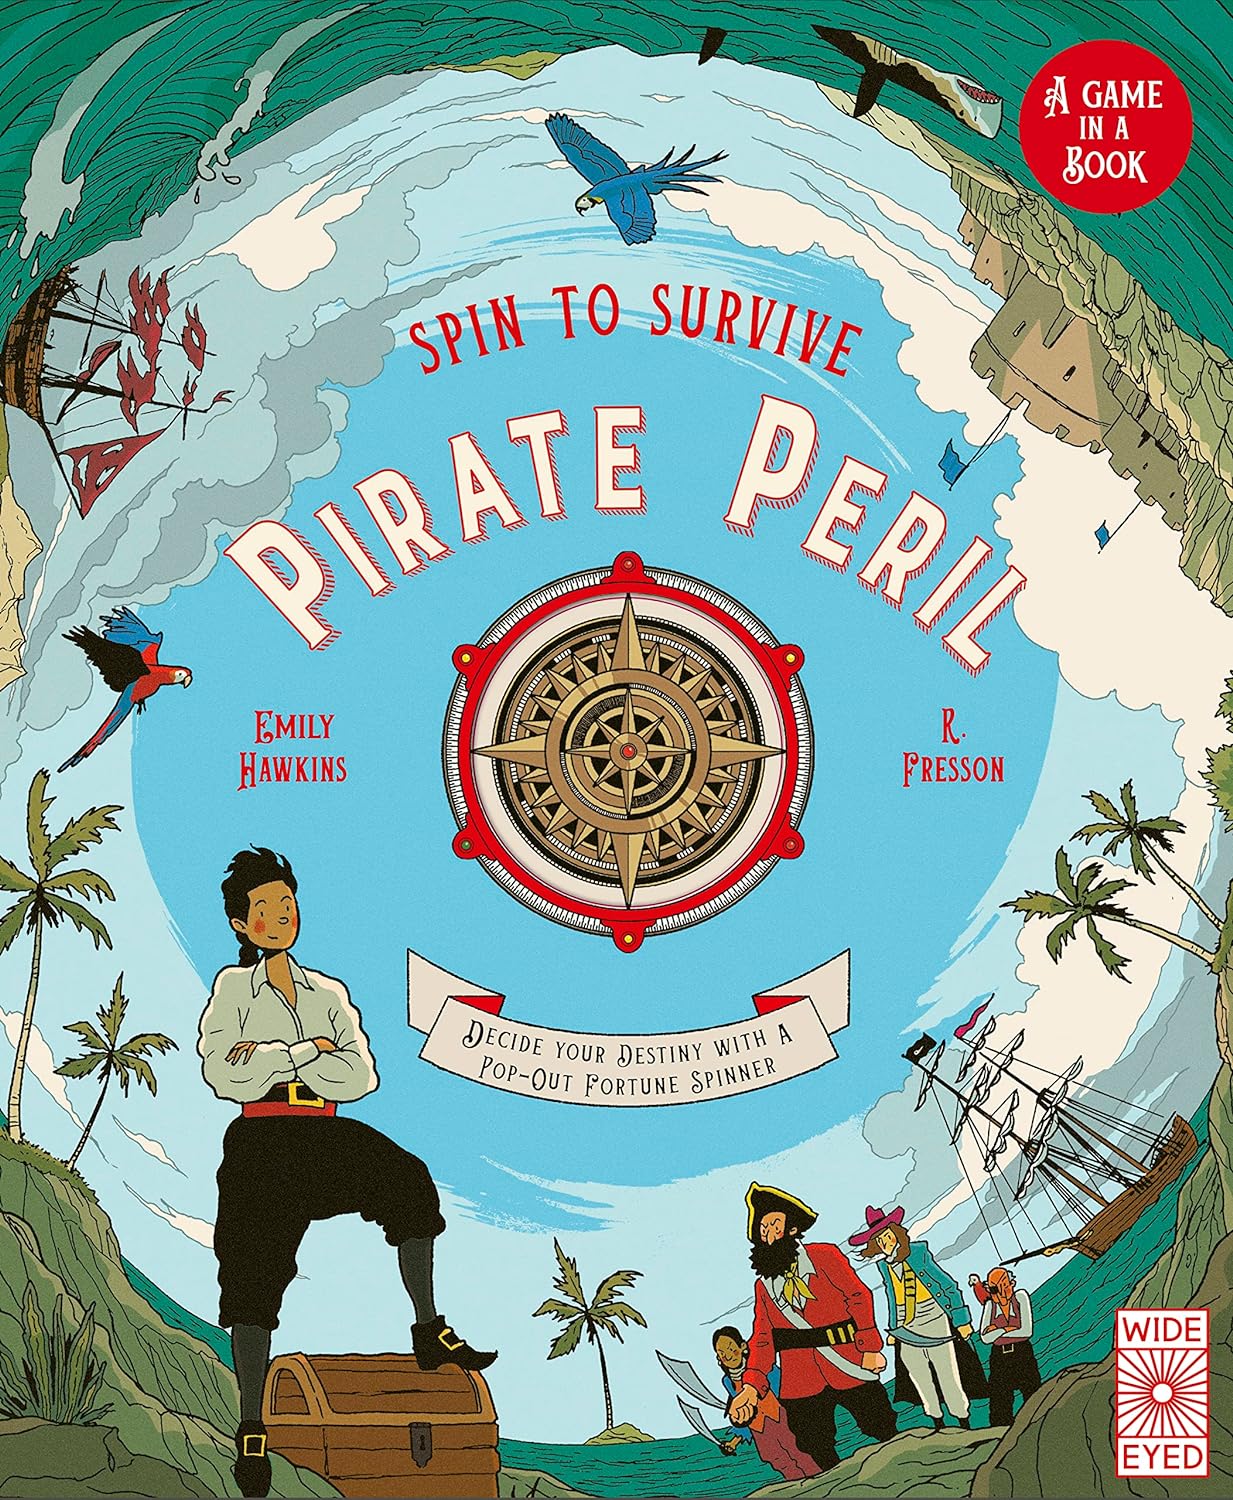 Spin to Survive: Pirate Peril - Decide Your Destiny with a Pop-Up Fortune Spinner